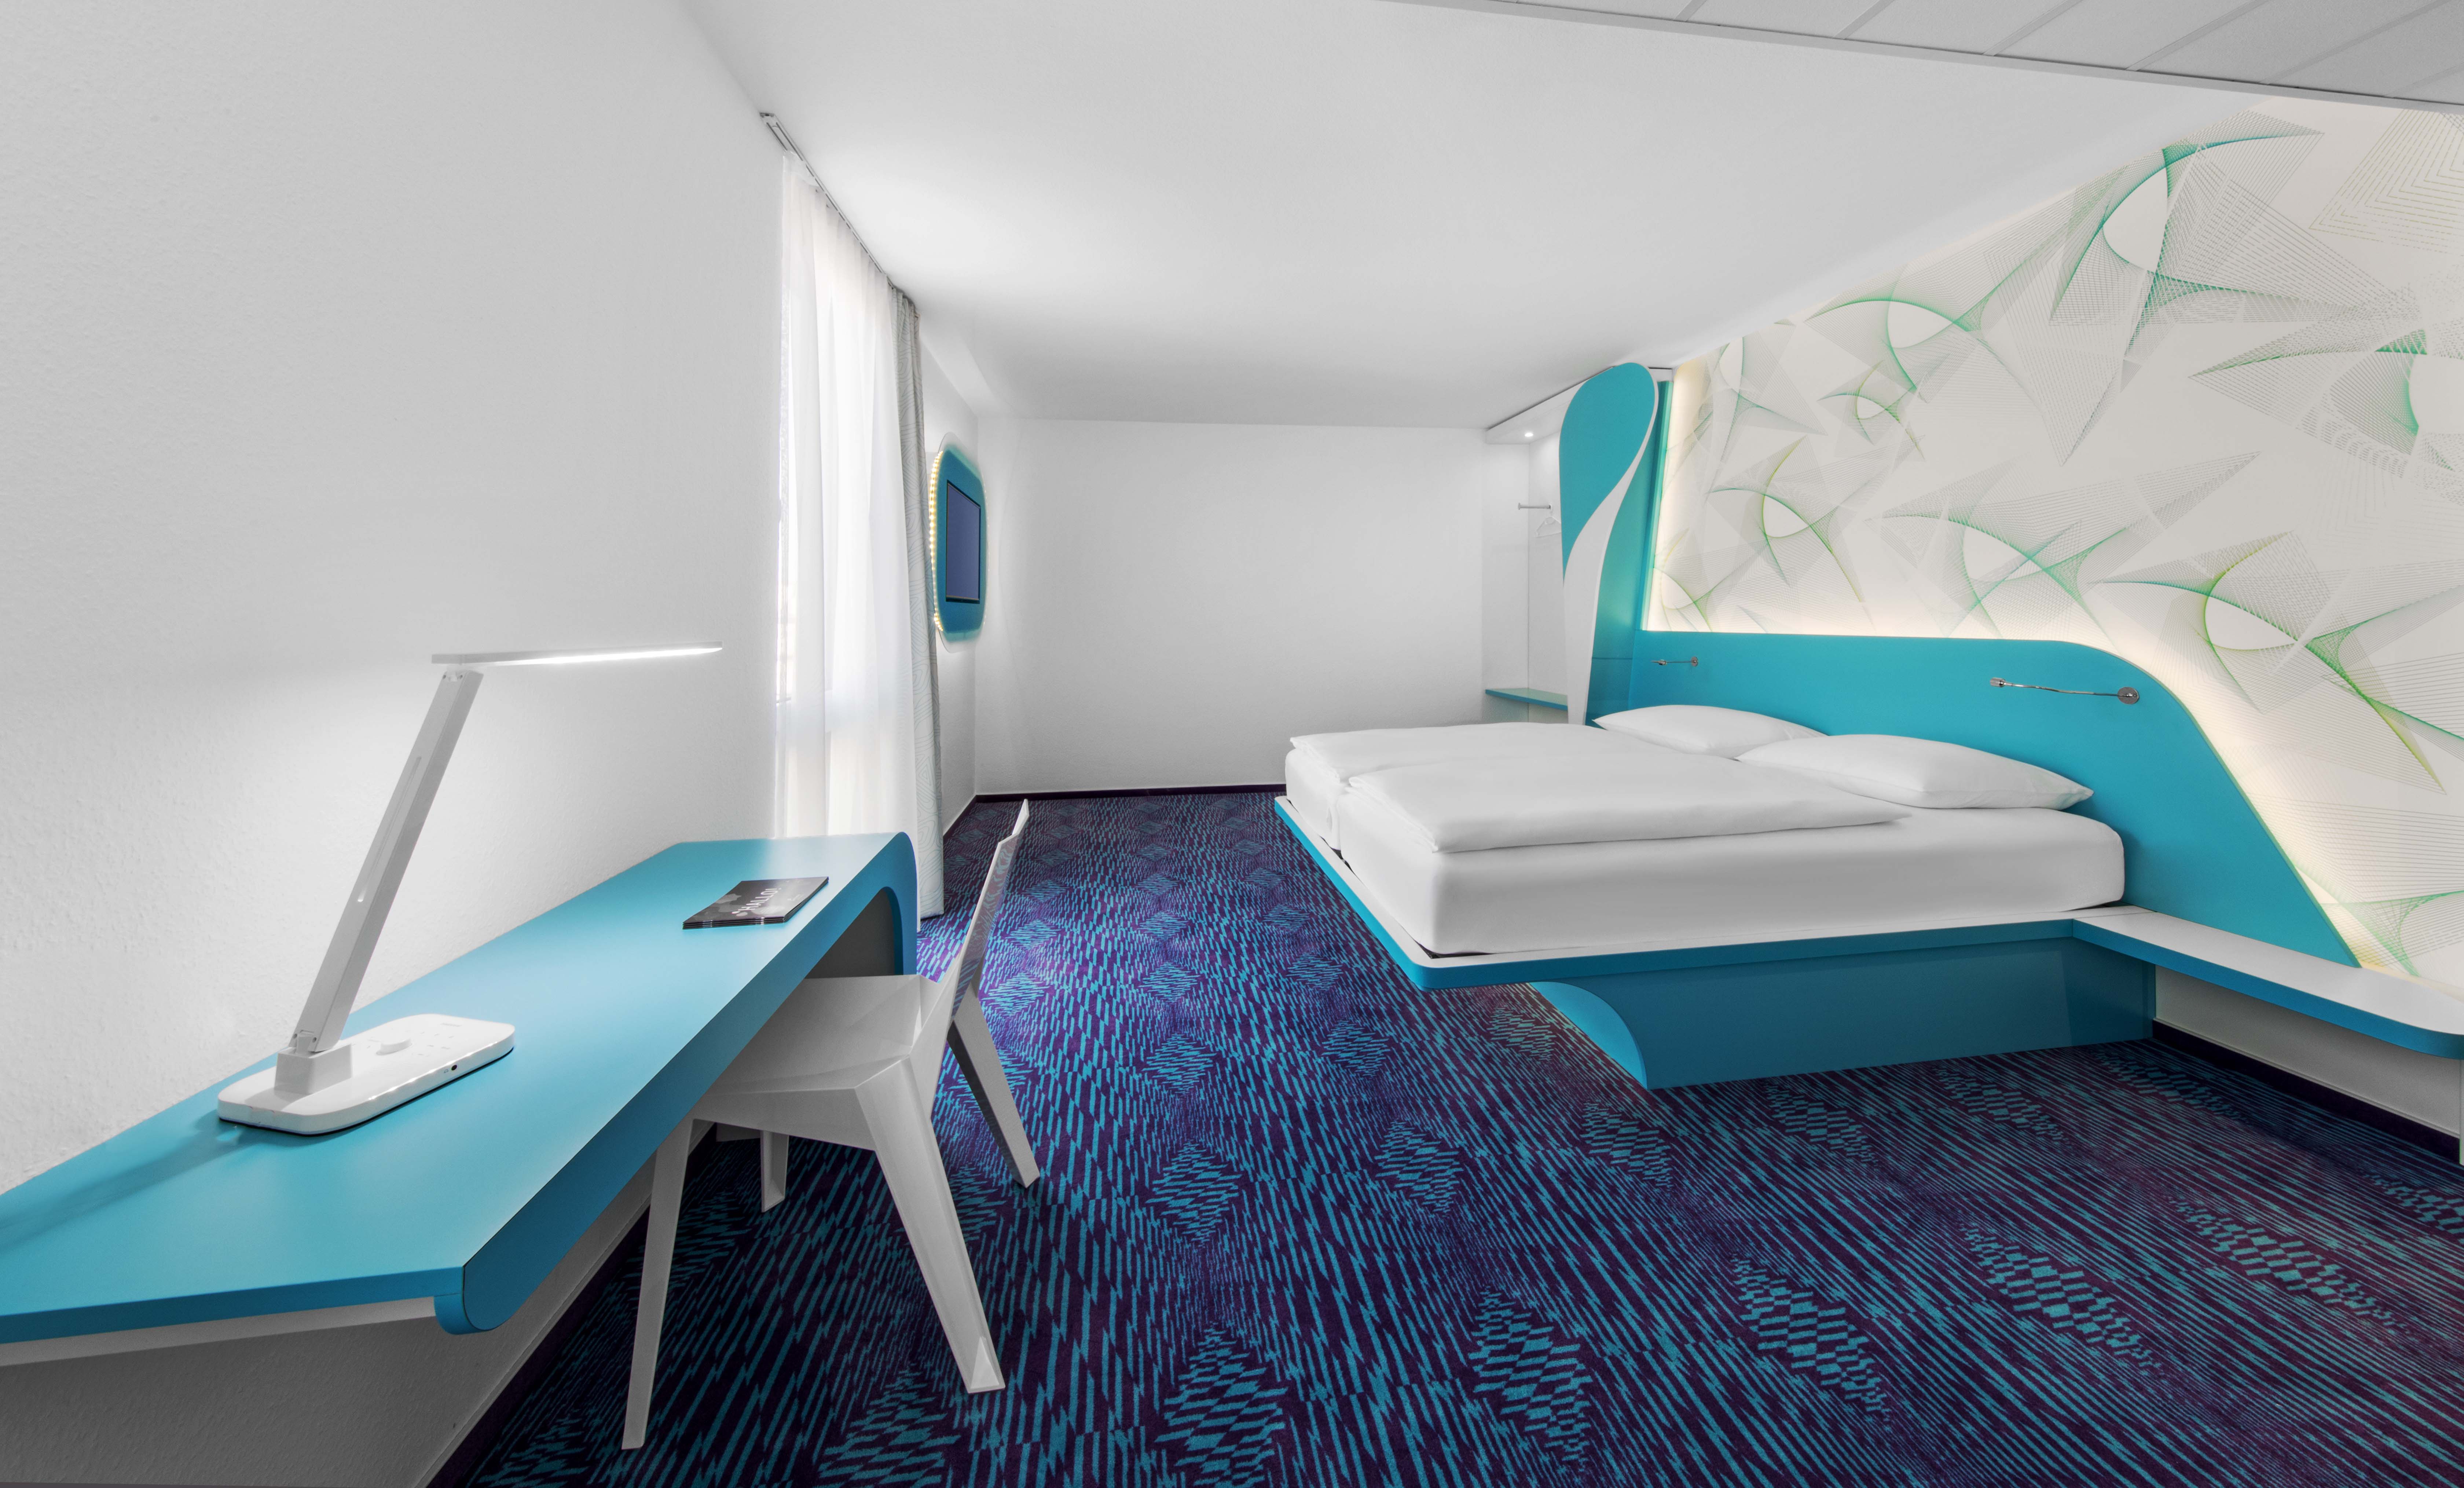 Design hotel room with a blue pattern, a double bed and a working space